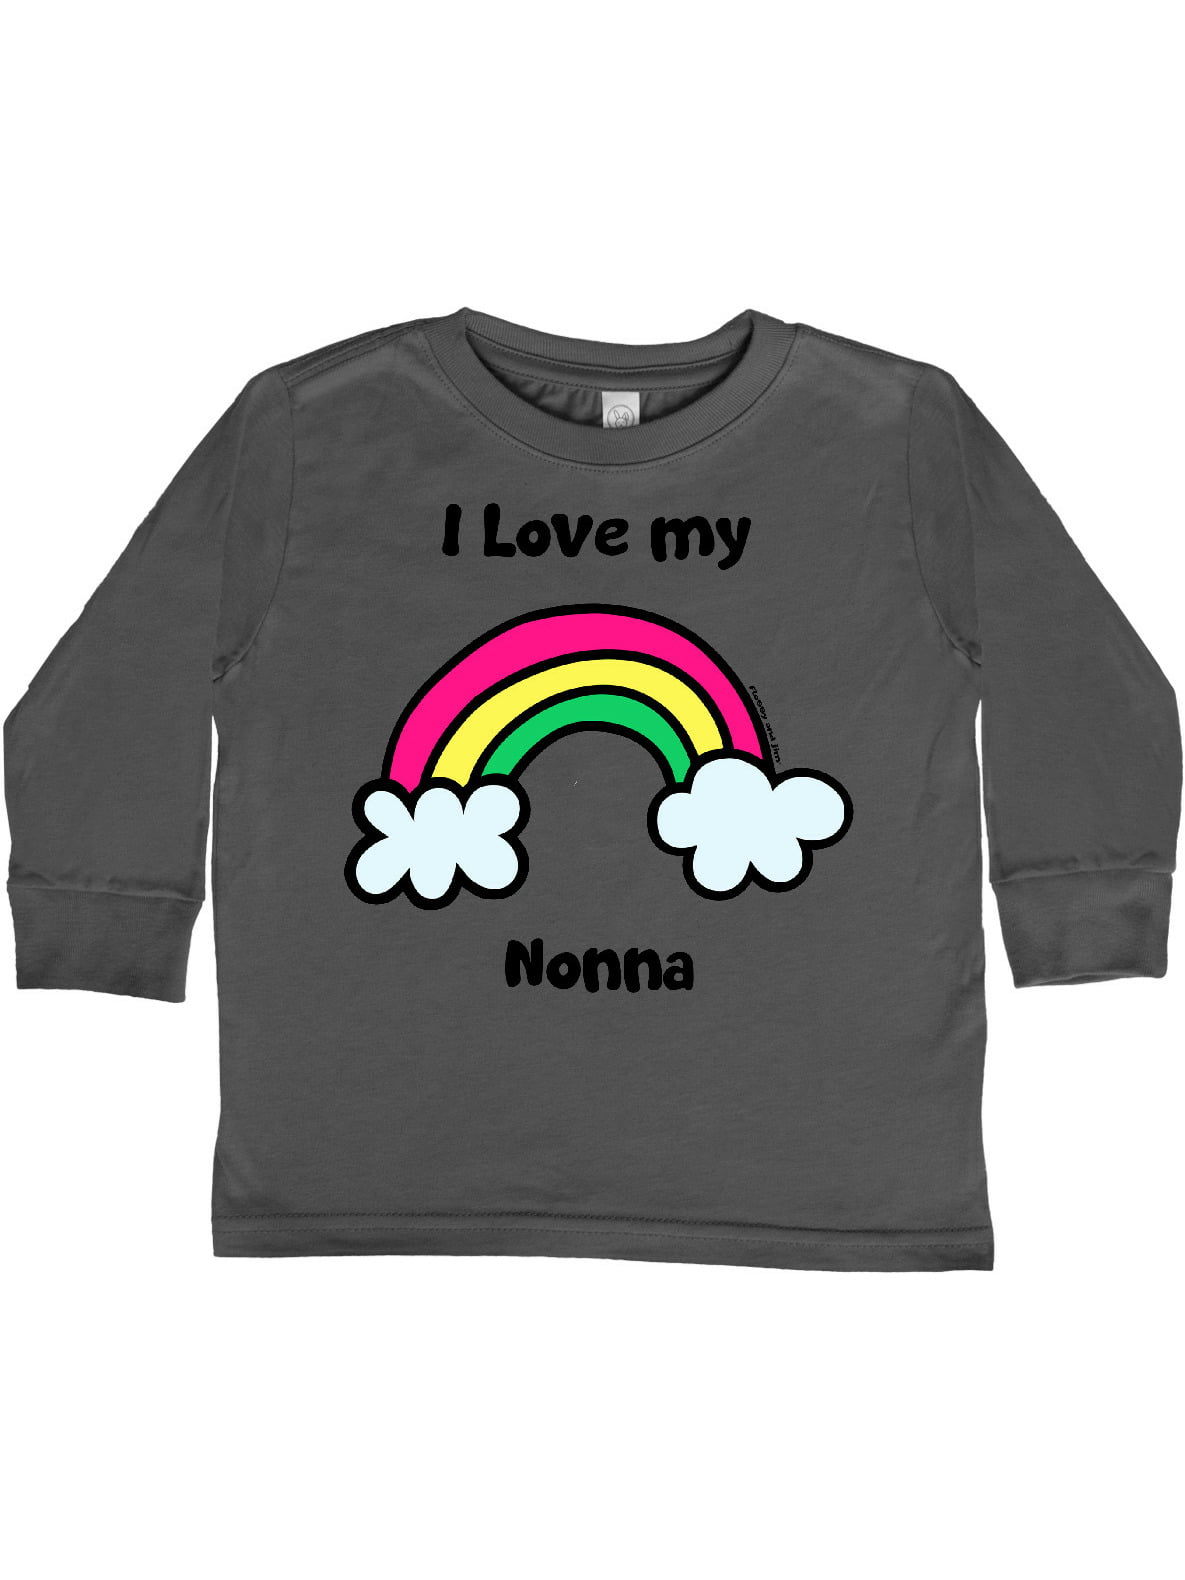 Flossy and Jim Out of This World Baby T-Shirt inktastic Nonna